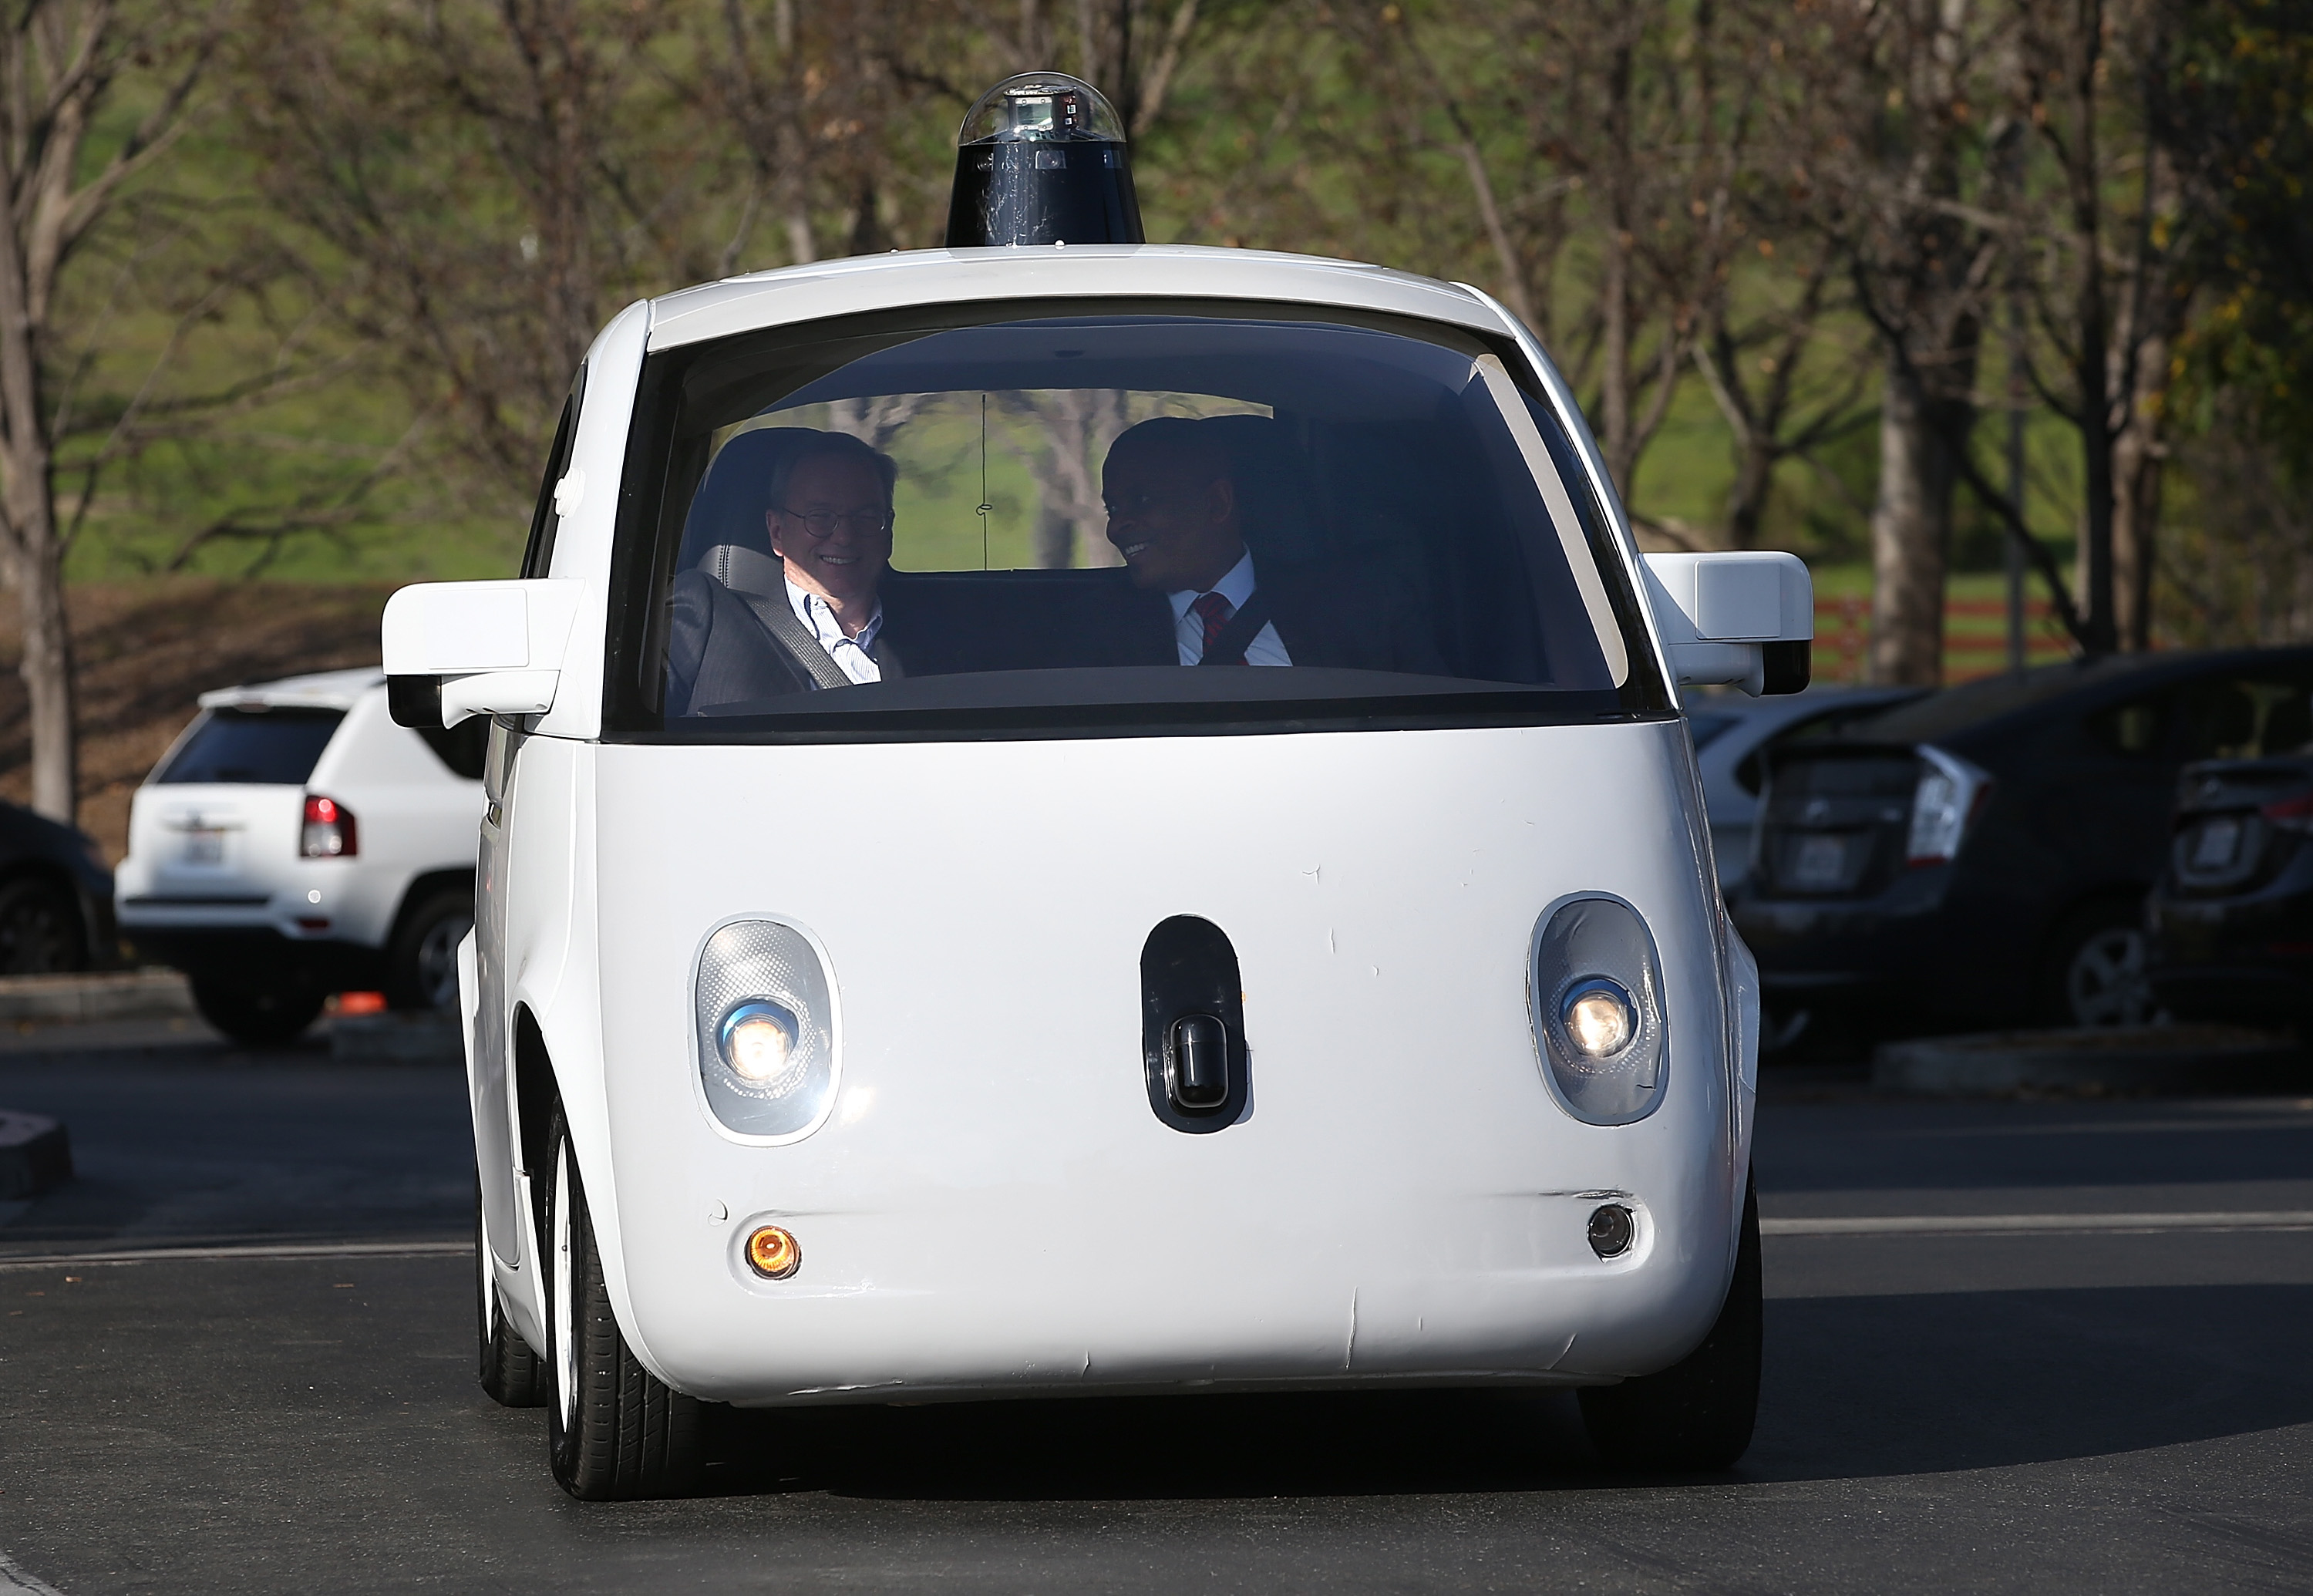 U.S. Transportation Secretary Anthony Foxx (R) and Google Chairman Eric Schmidt (L) ride in a Google self-driving car at the Google headquarters on Feb. 2, 2015 in Mountain View, California.